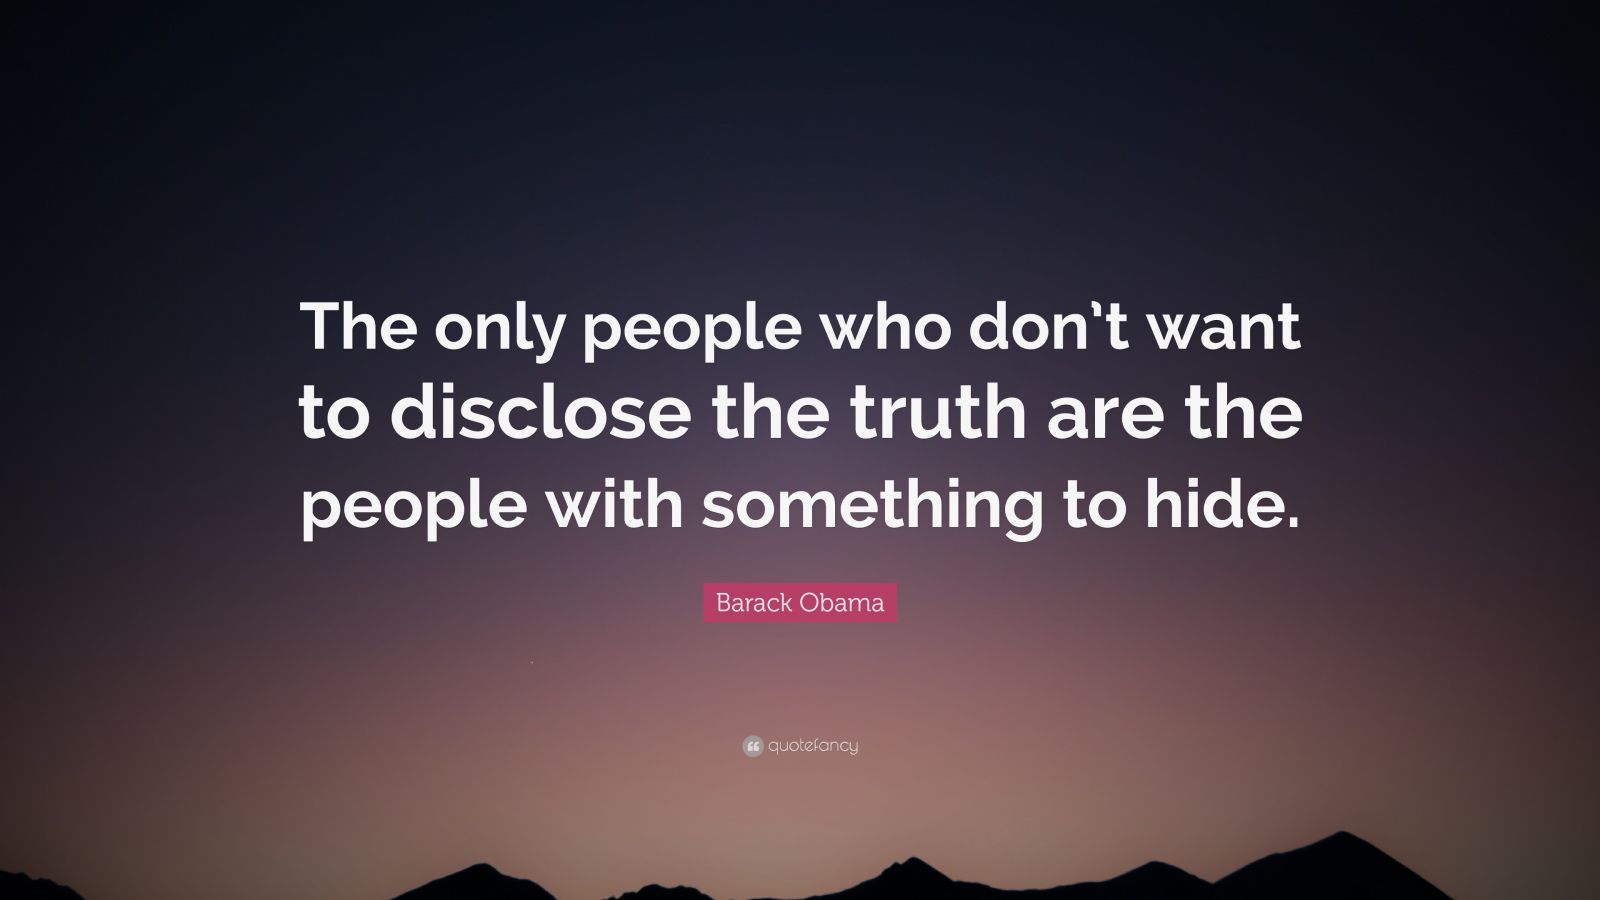 Barack Obama Quote: “The only people who don’t want to disclose the